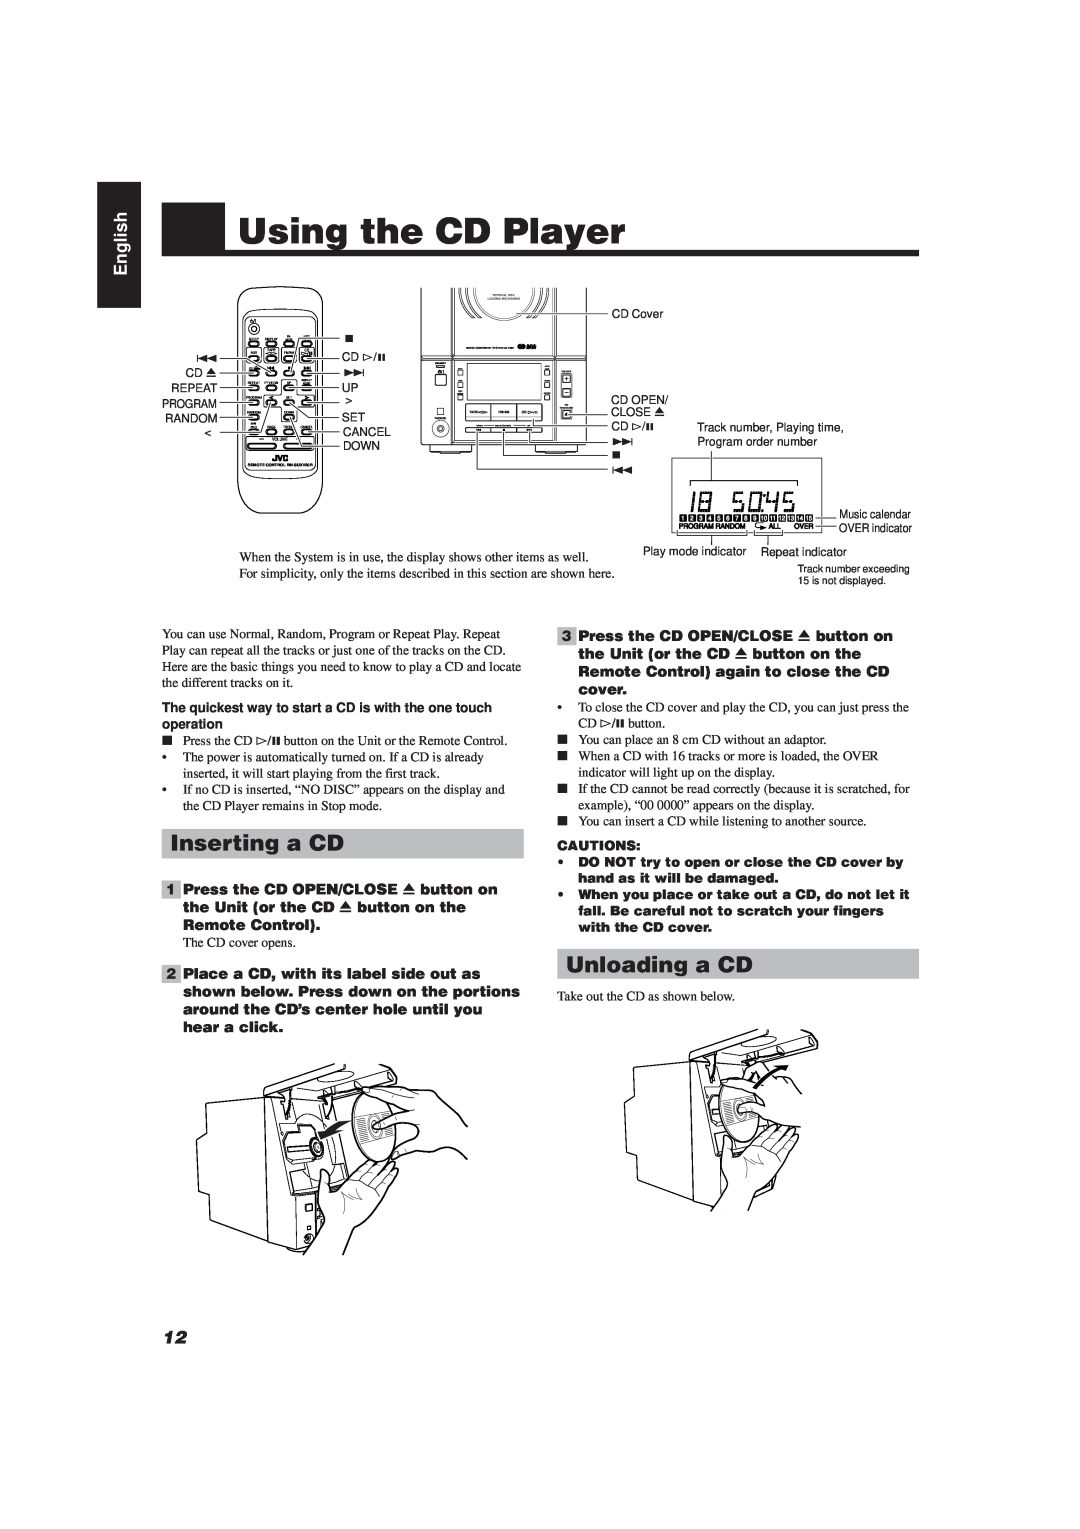 JVC UX-V20R/UX-V10 manual Using the CD Player, Inserting a CD, Unloading a CD, English, Take out the CD as shown below 